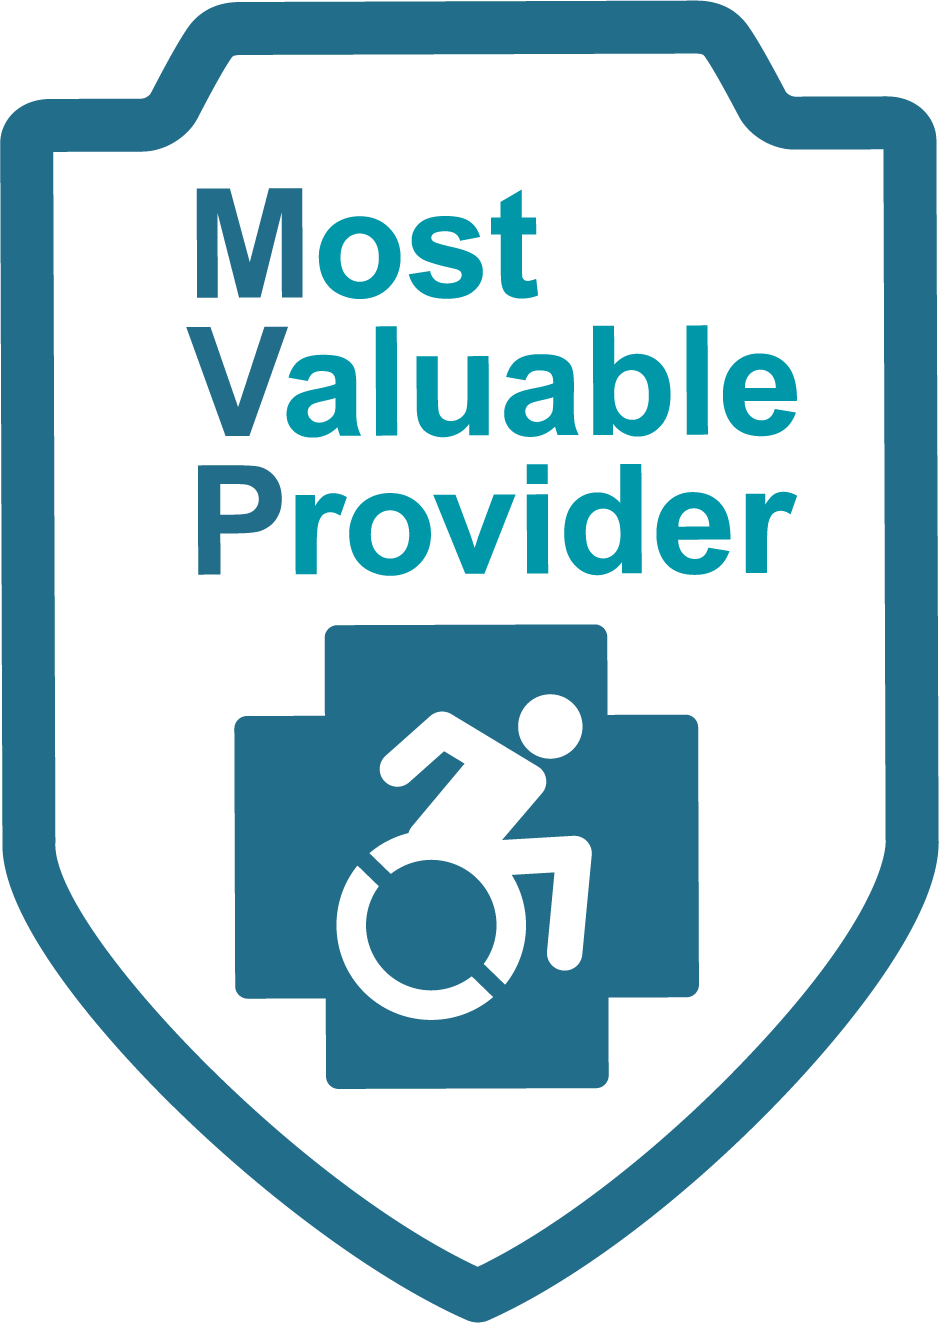 Most Valuable provider logo. The outline of a shield with a blue medical cross and wheelchair icon in the middle.